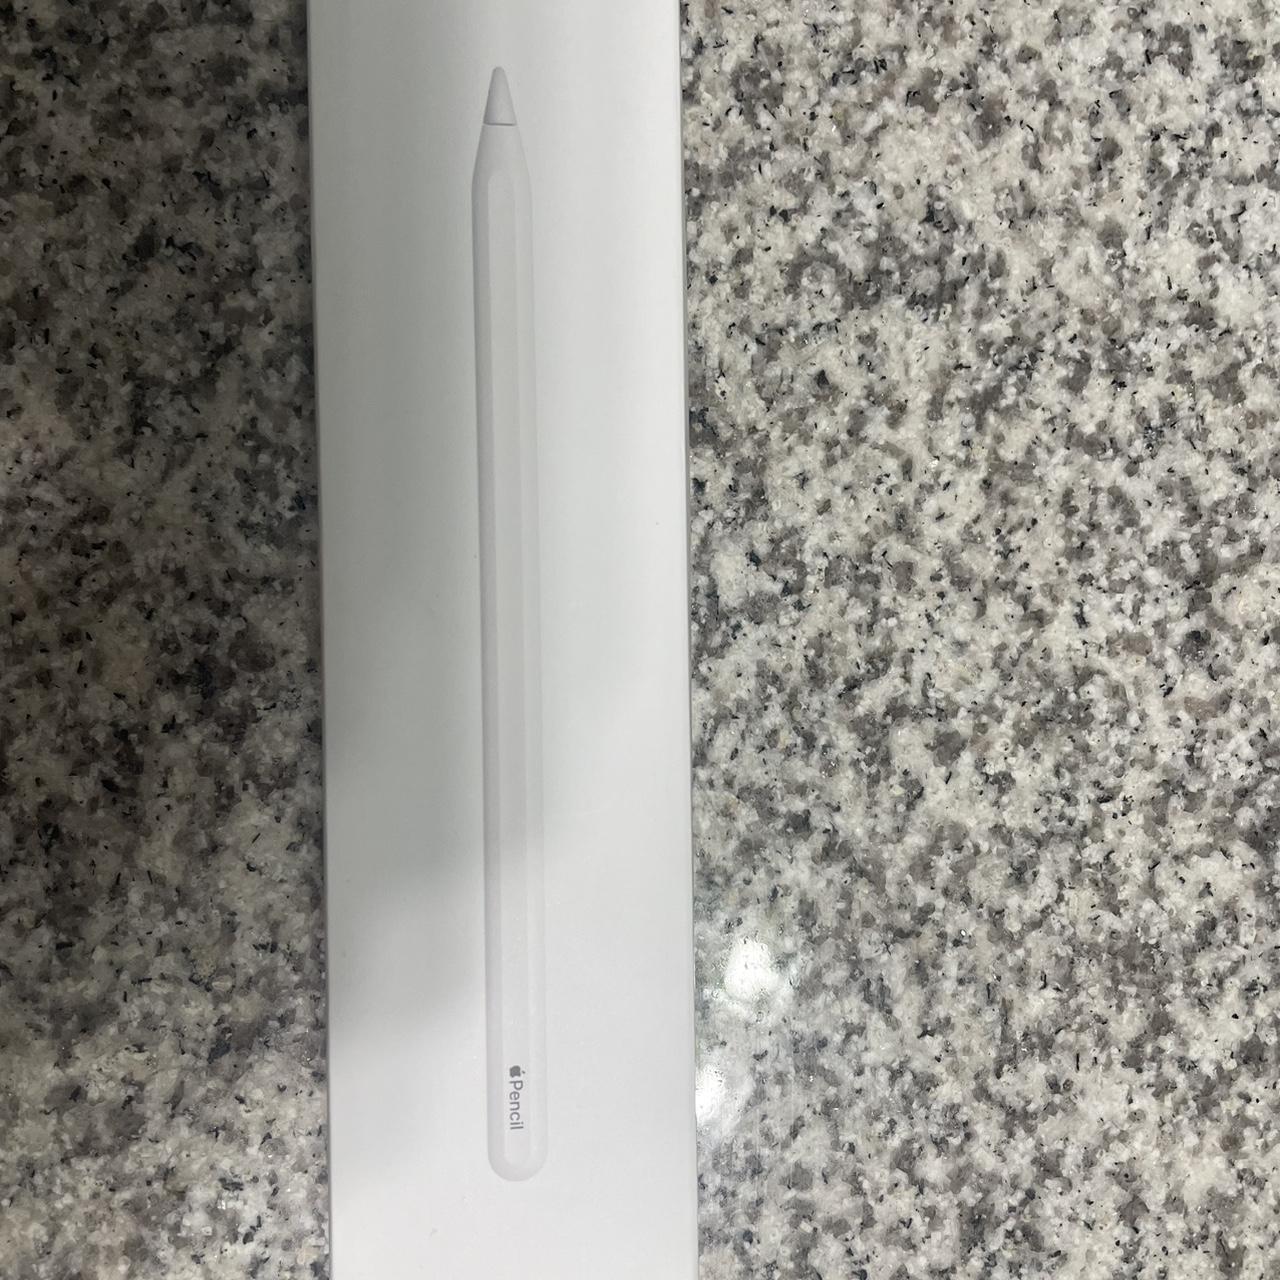 Product Image 2 - Apple Pencil 2nd gen 
Shipping